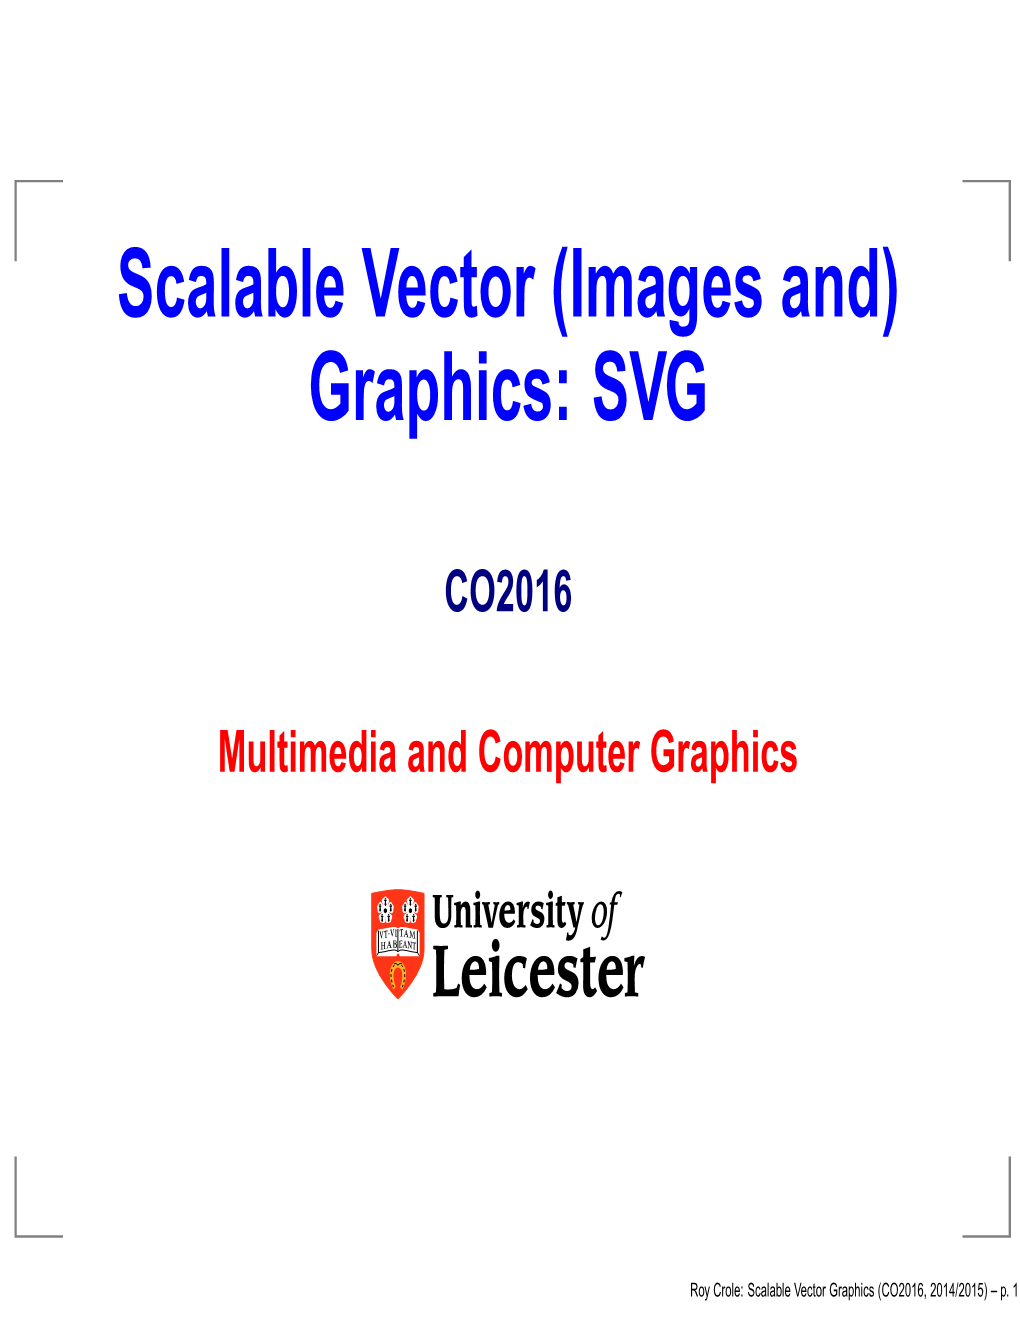 Scalable Vector (Images And) Graphics: SVG